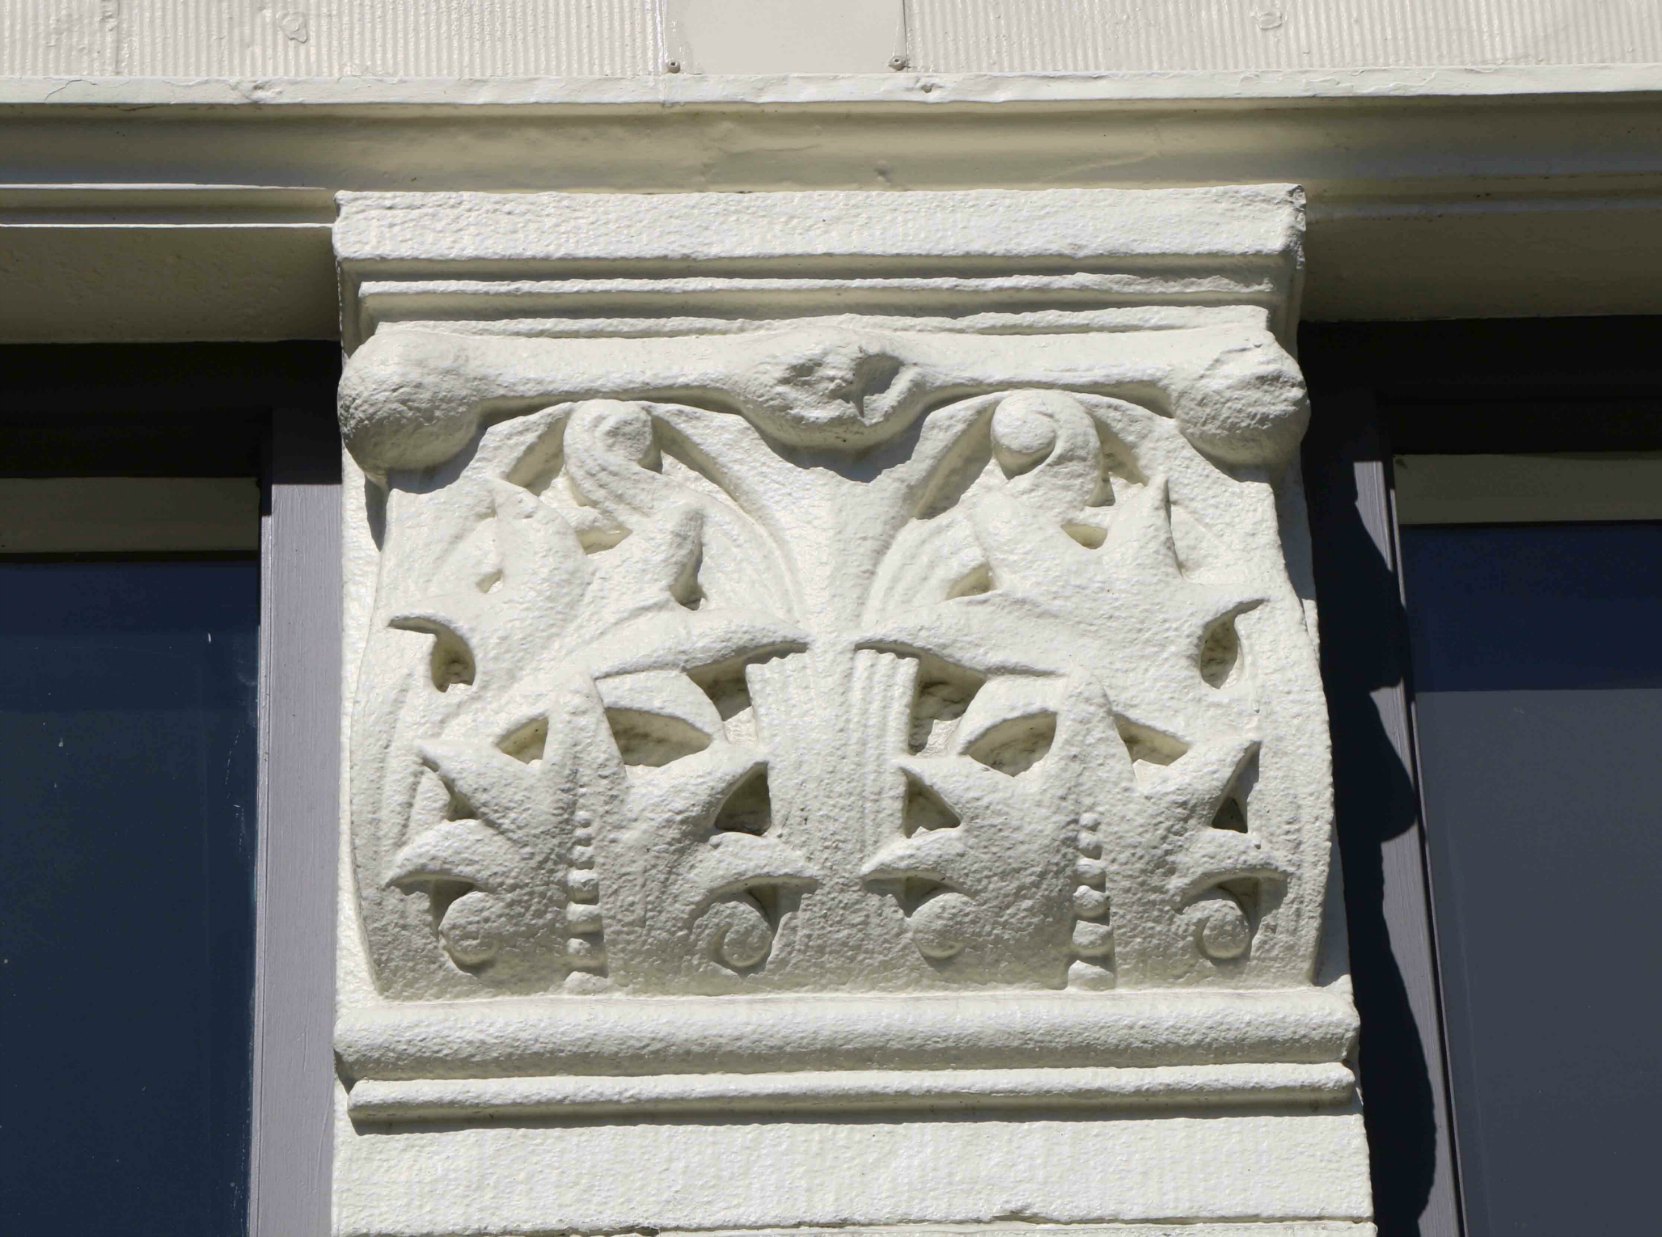 Original decorative architectural detail on the facade of 1312-1314 Government Street